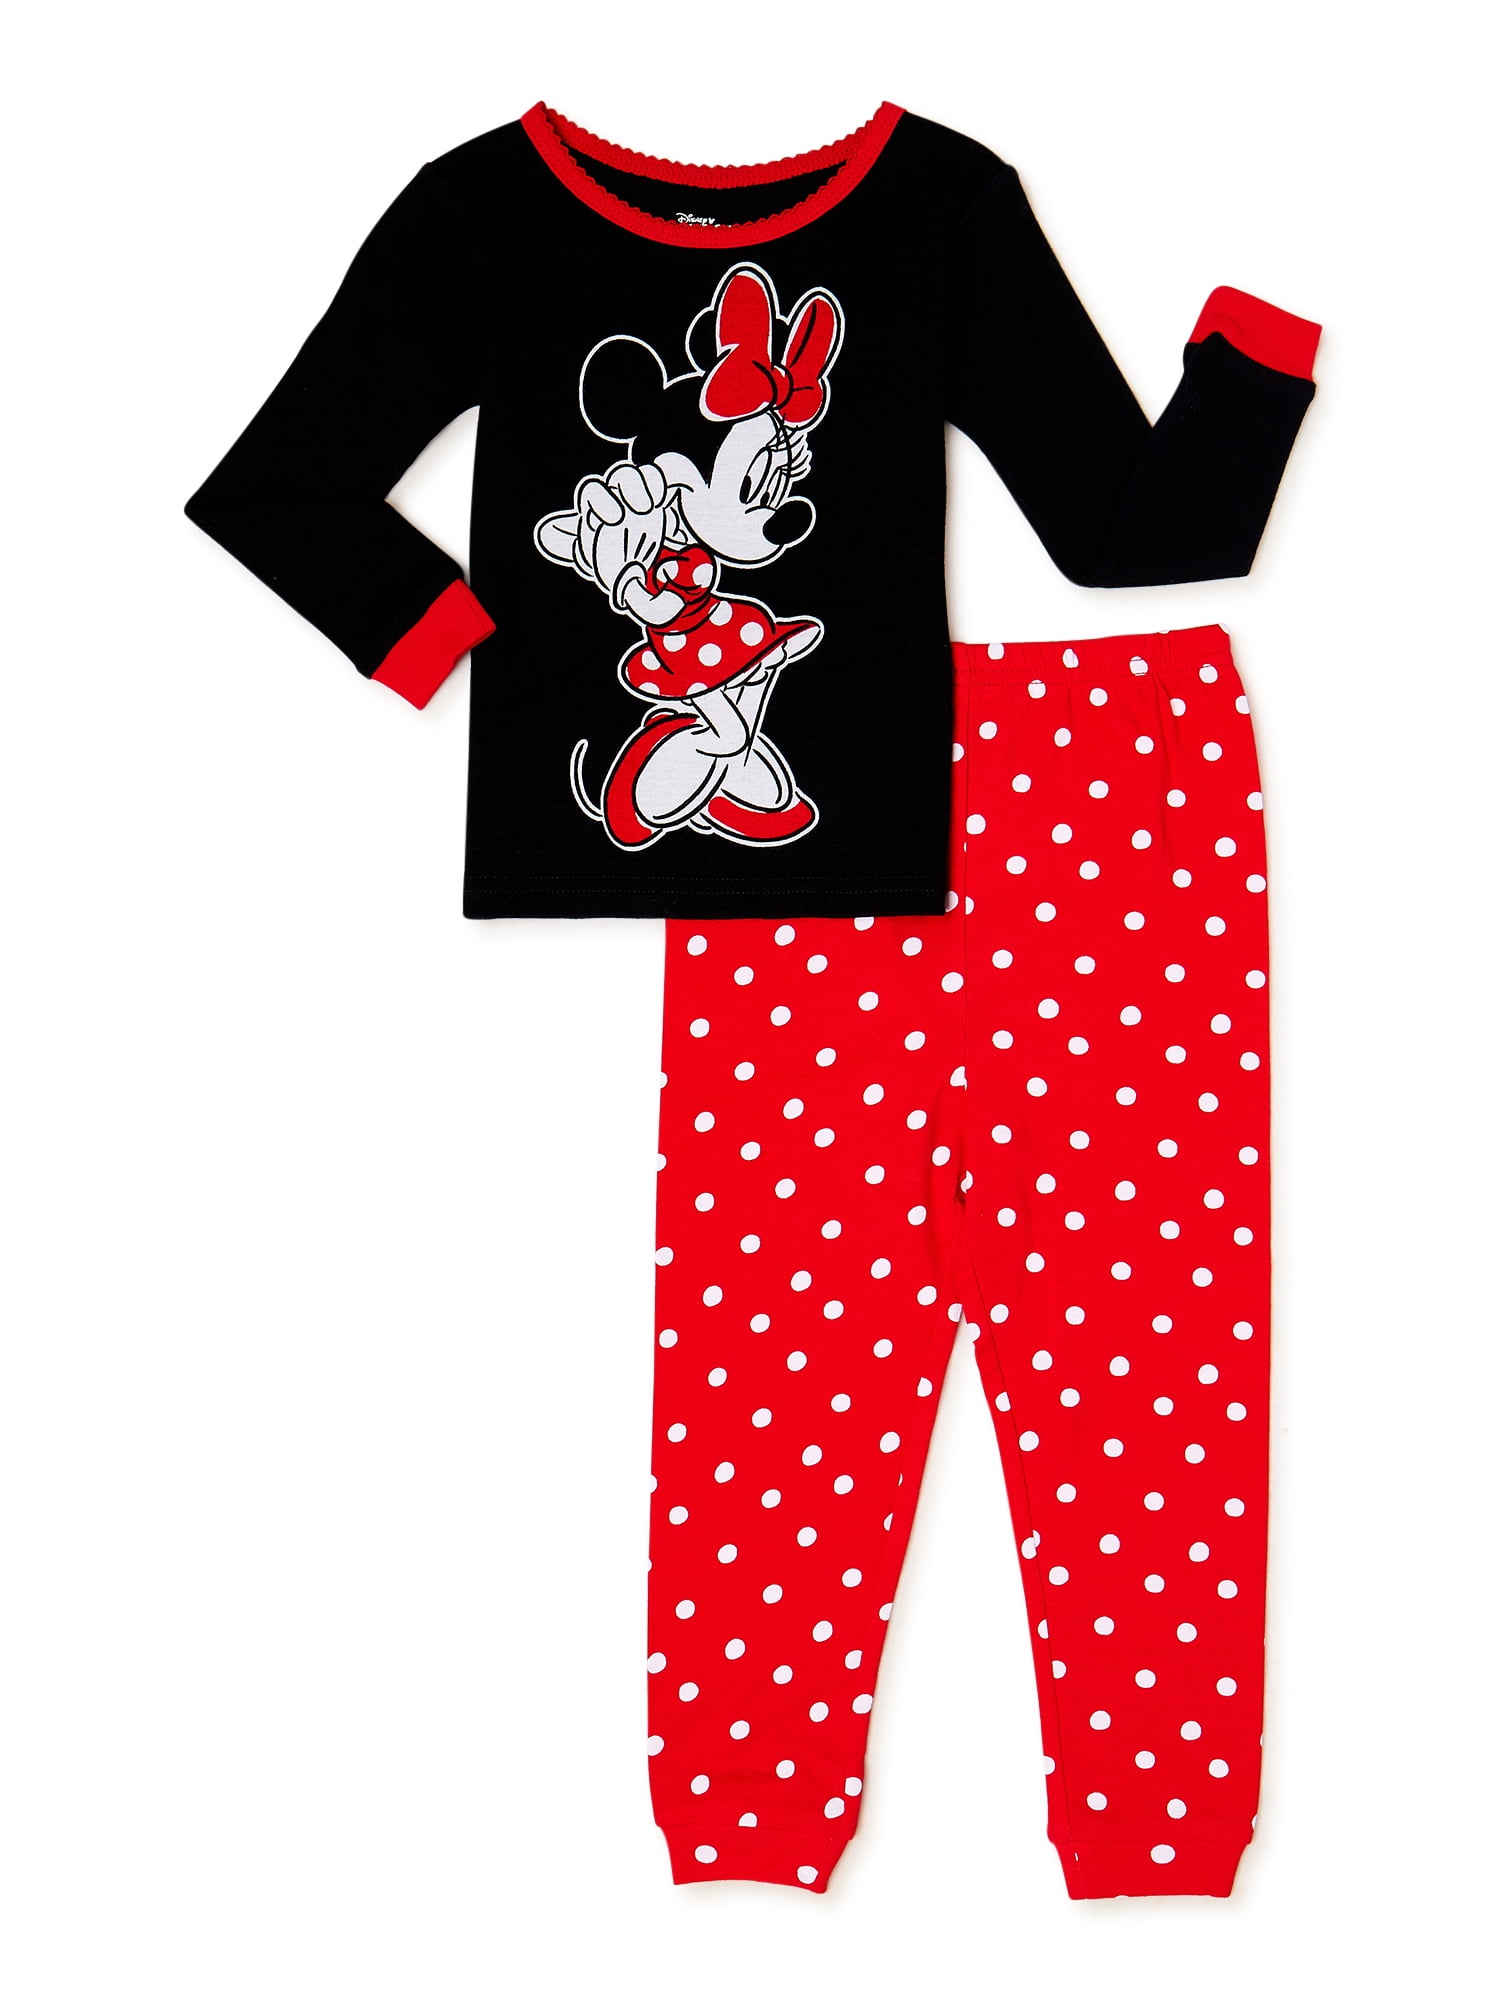 Character Long Sleeve Top and Pants, 2-Piece Pajamas Set, Sizes 2T-5 T